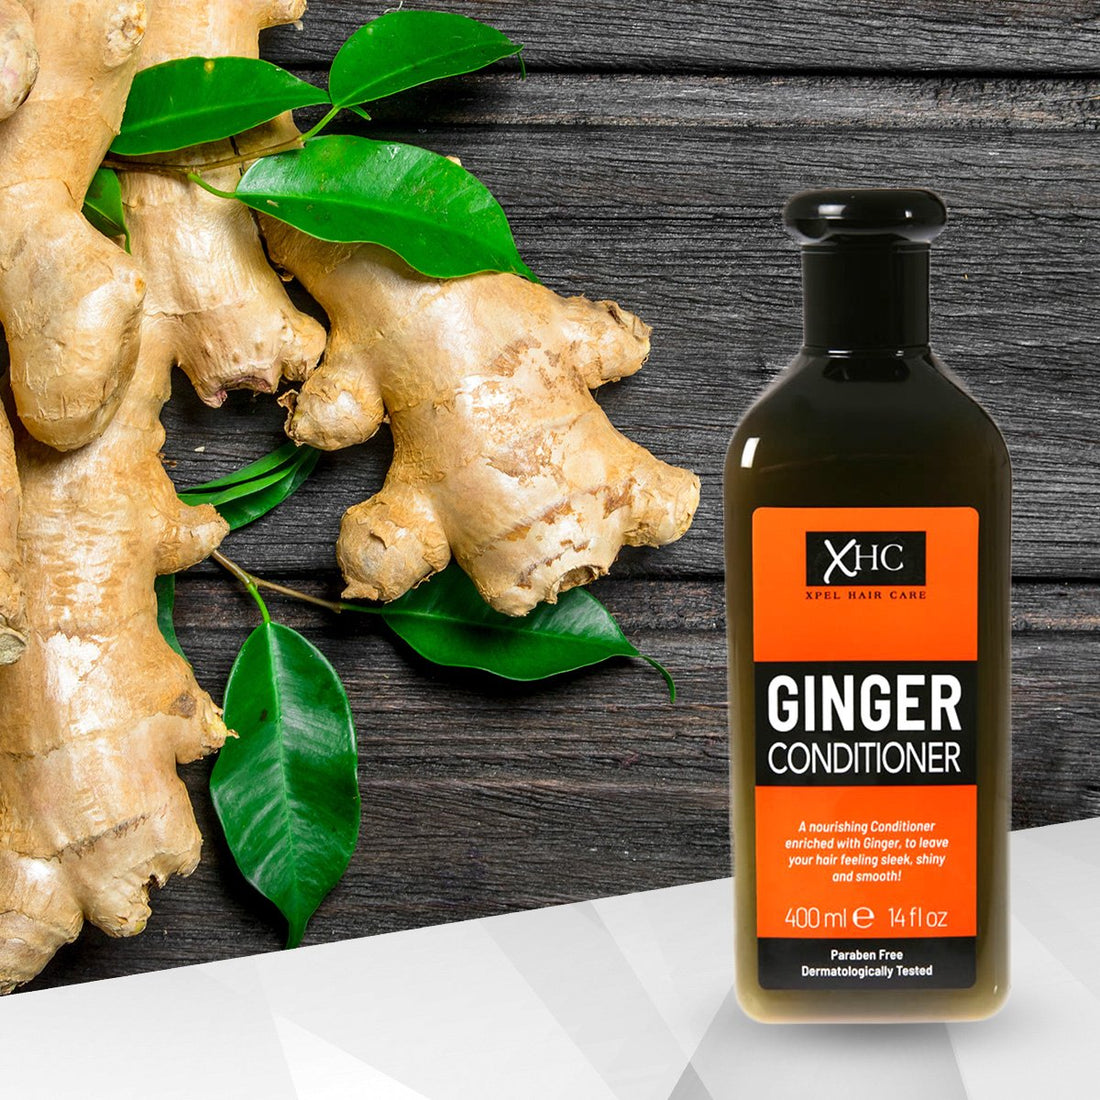 XHC Xpel Hair Care Ginger Conditioner (400ml)